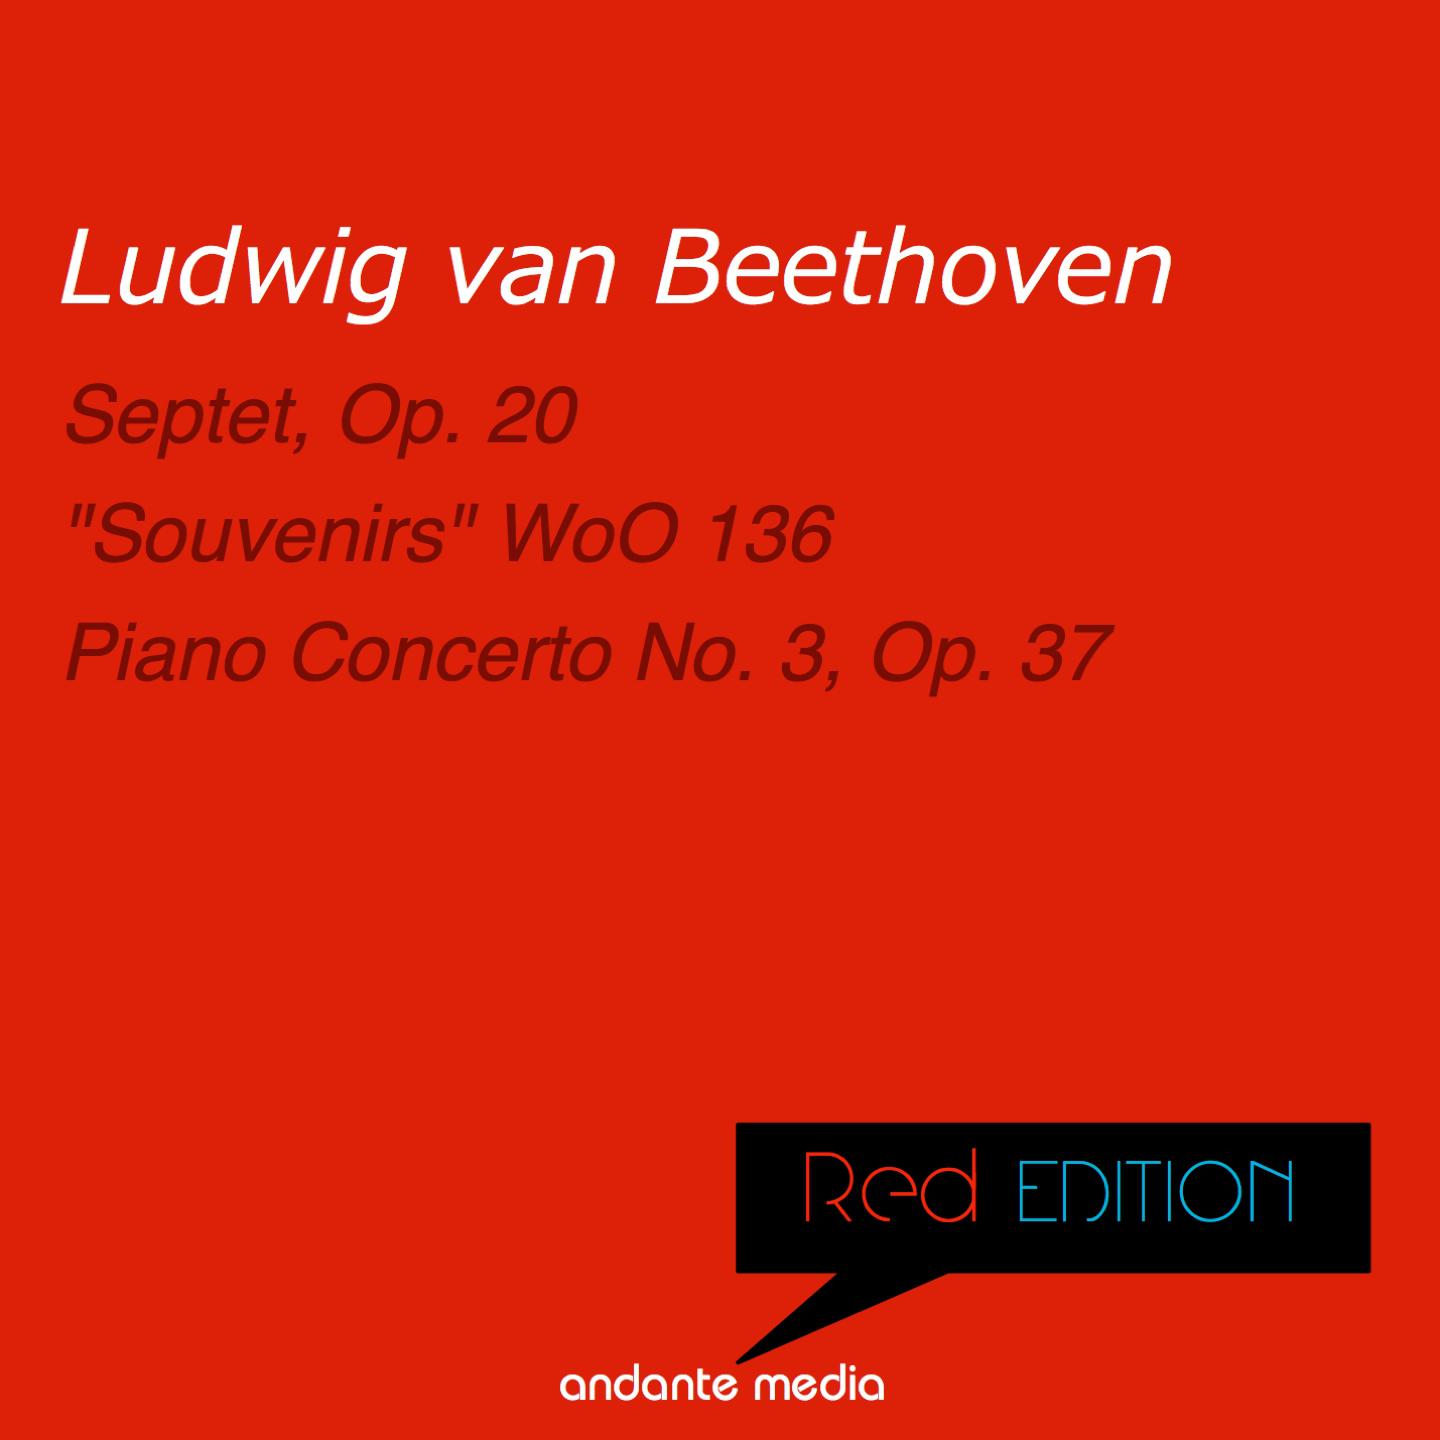 Red Edition - Beethoven: Septet, Op. 20 & Piano Concerto No. 3, Op. 37